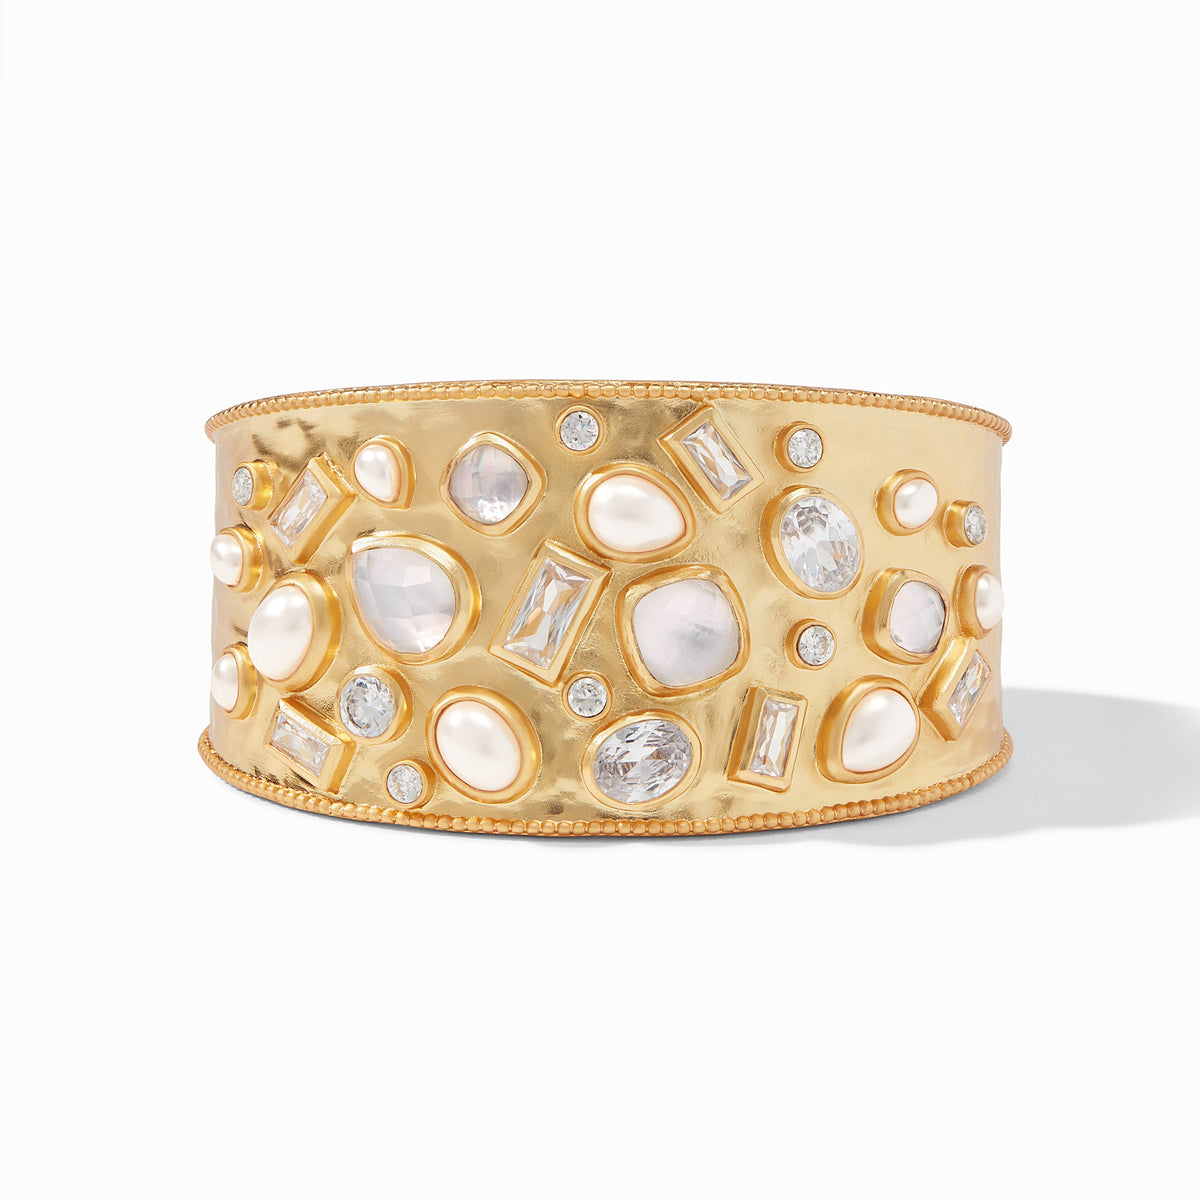 Wide Cuff Bracelet in 18K Yellow Gold with a Hand Engraved Edge – Caleb  Meyer Studio